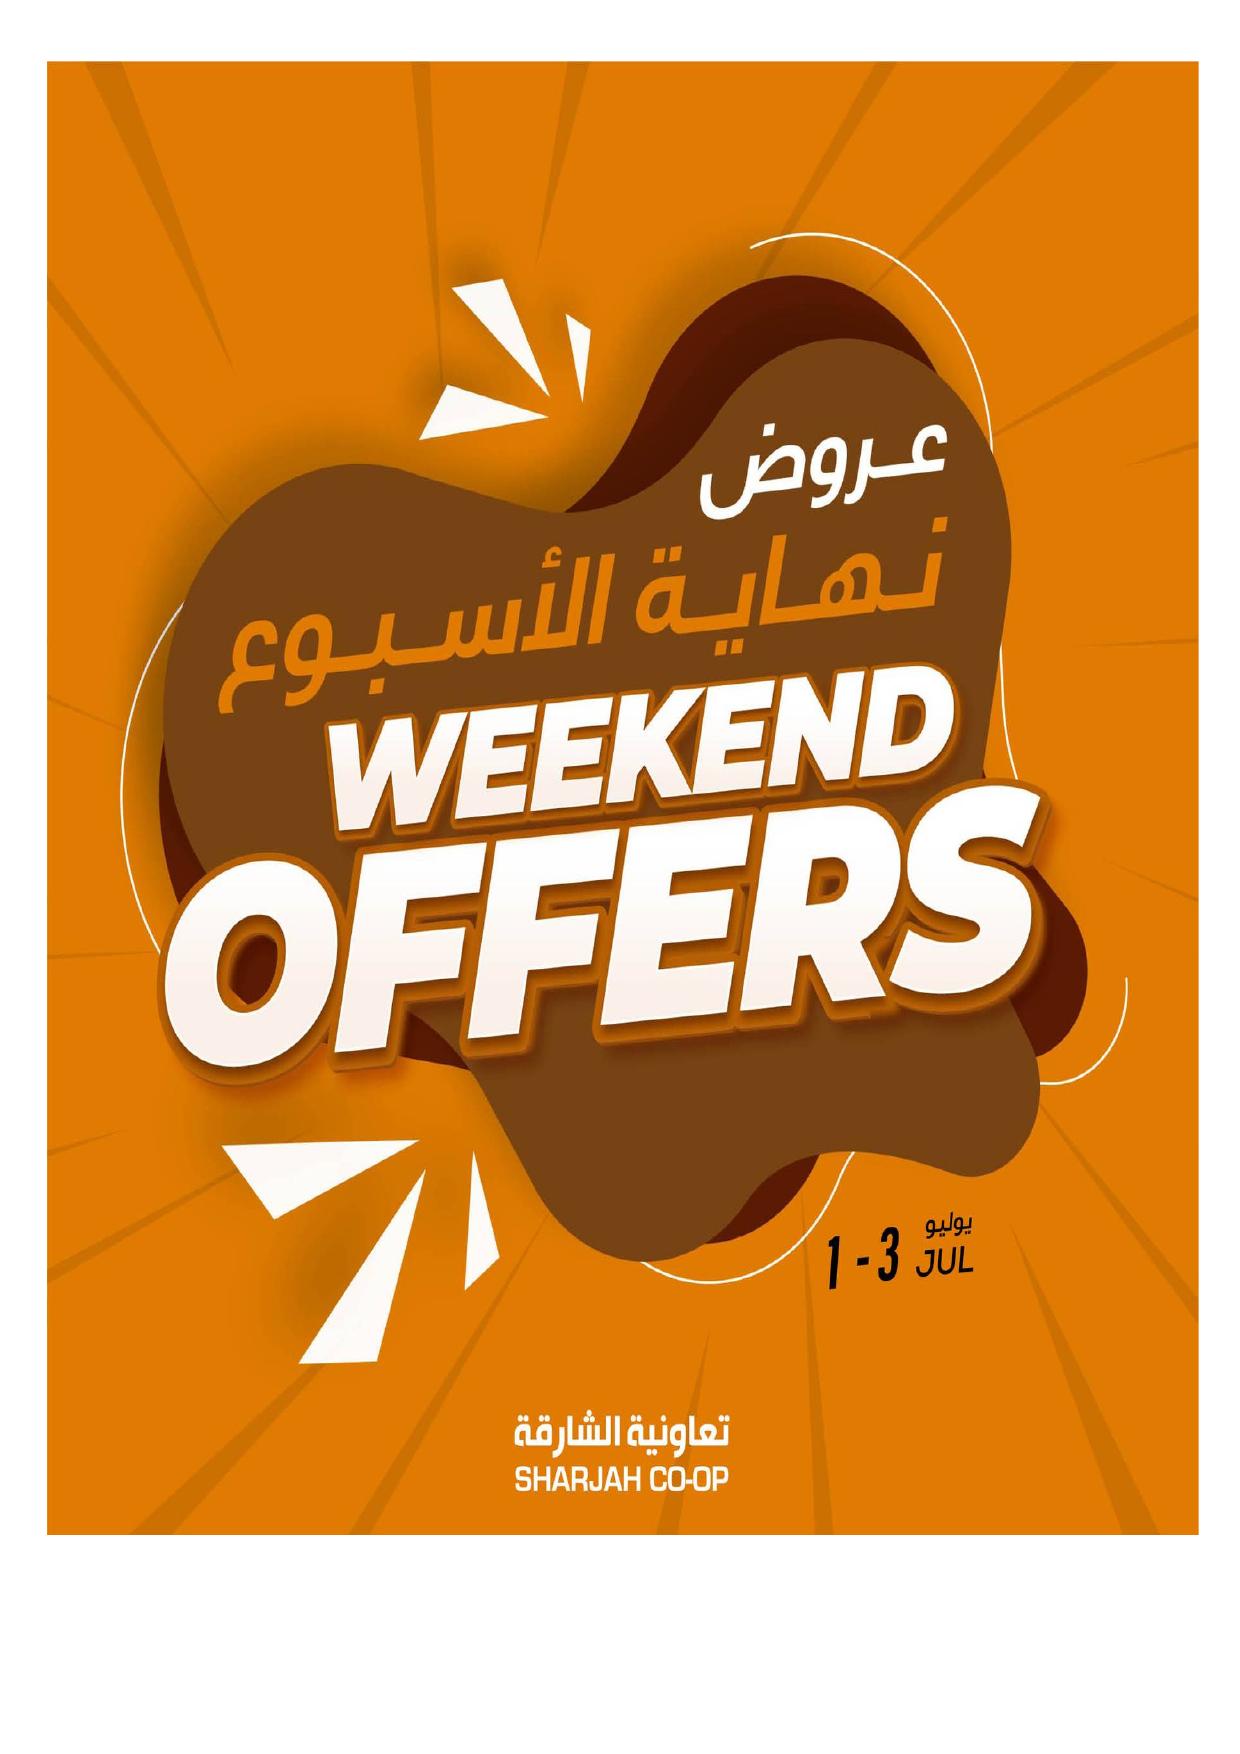 <p><span style="font-size: 18px;"><font color="#424242">Weekend Offers</font></span><br></p>